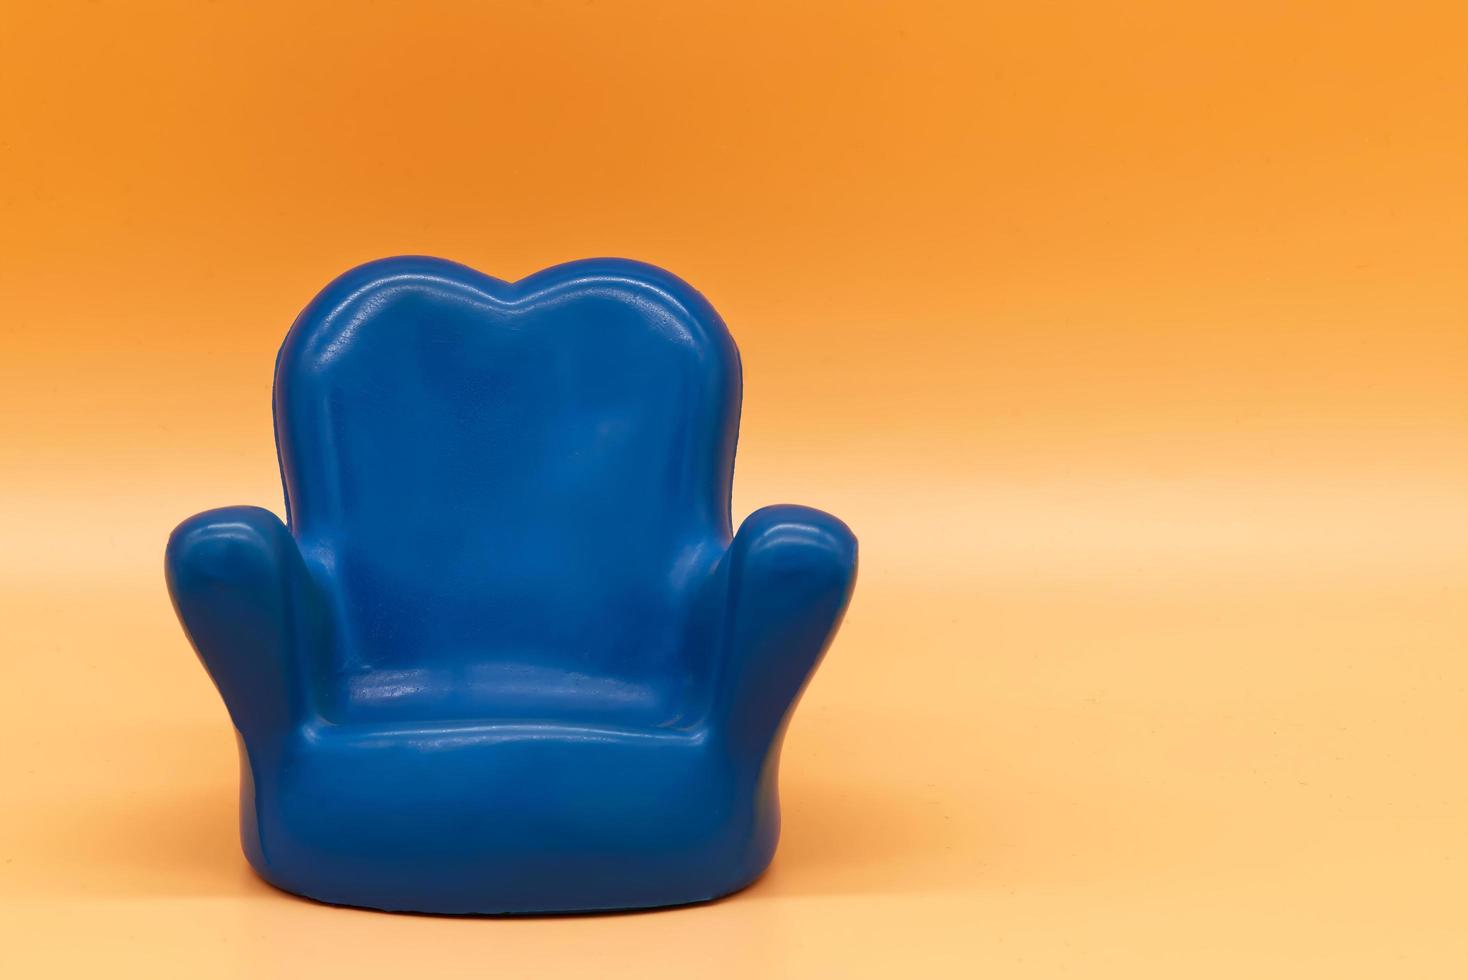 Rubber blue armchair isolated on orange background photo